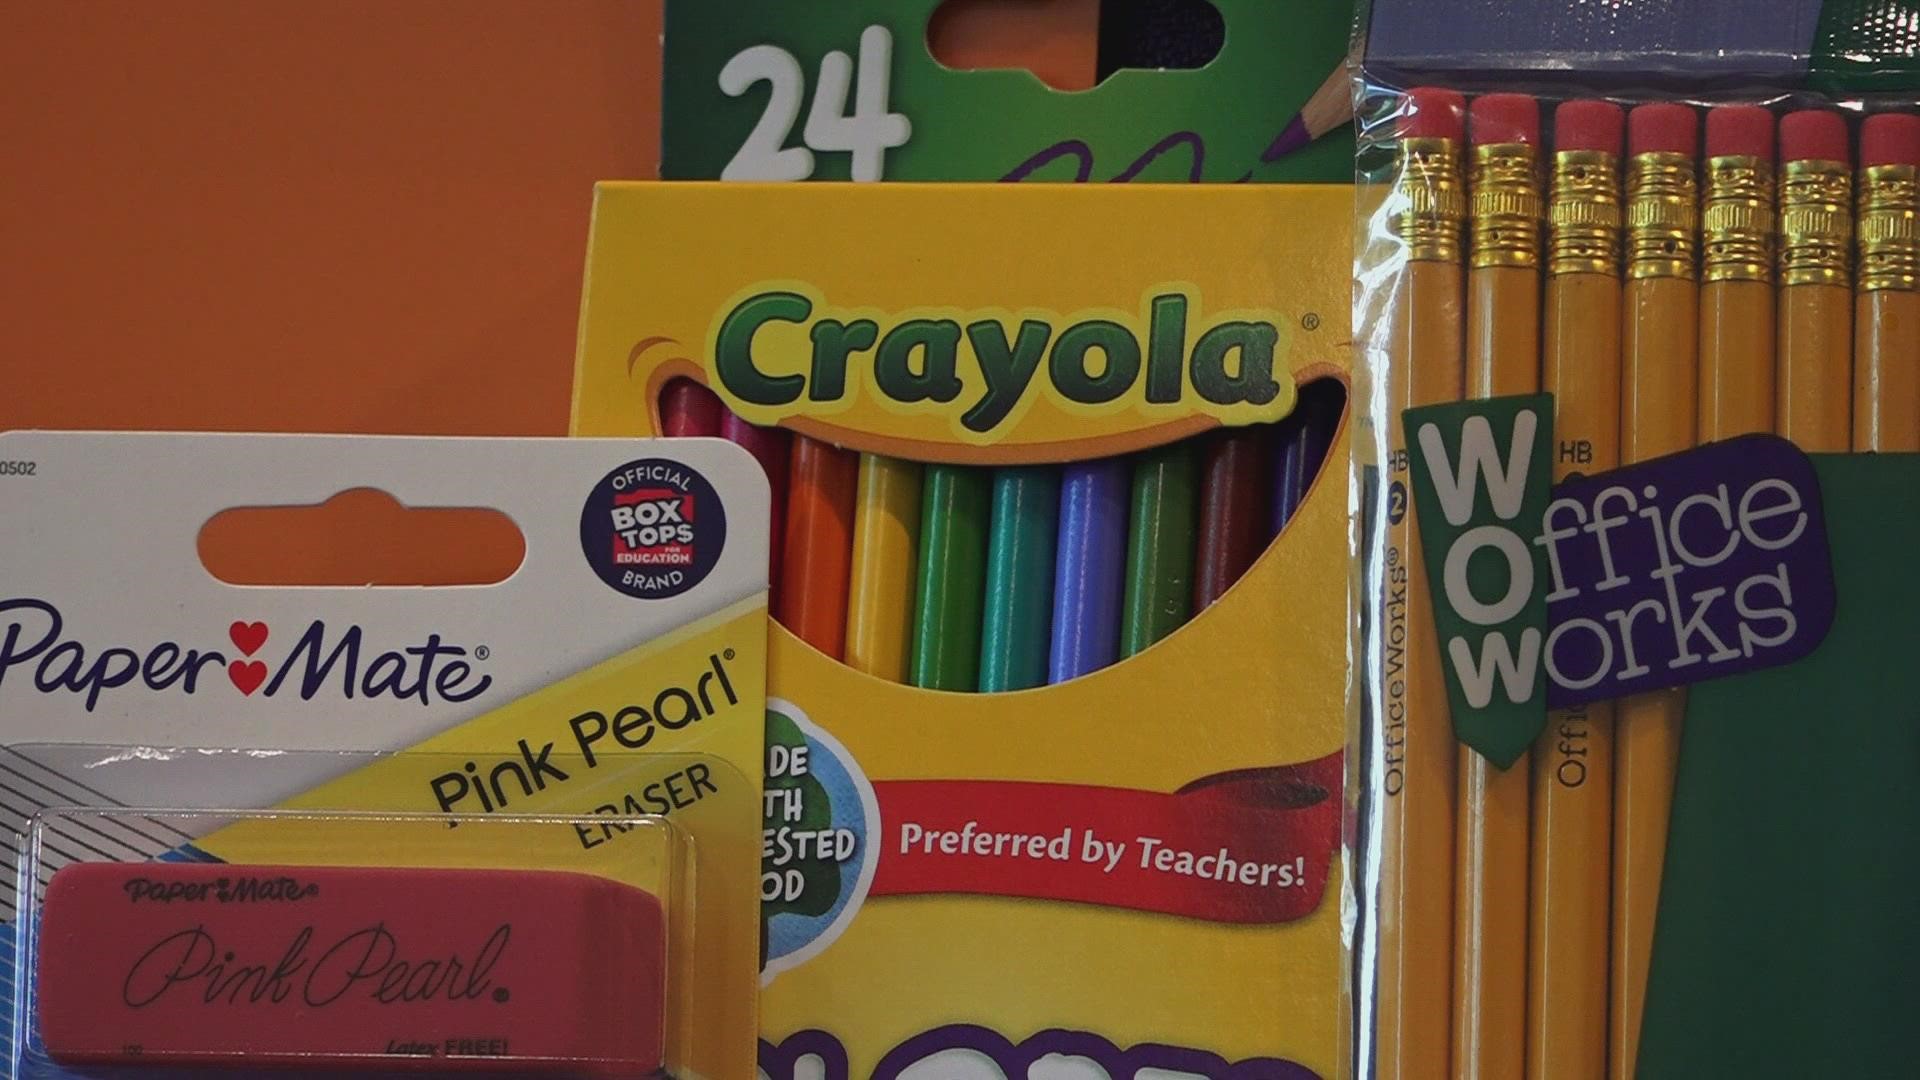 This weekend people in Tennessee can shop for school supplies tax-free. Here is how much you can save.